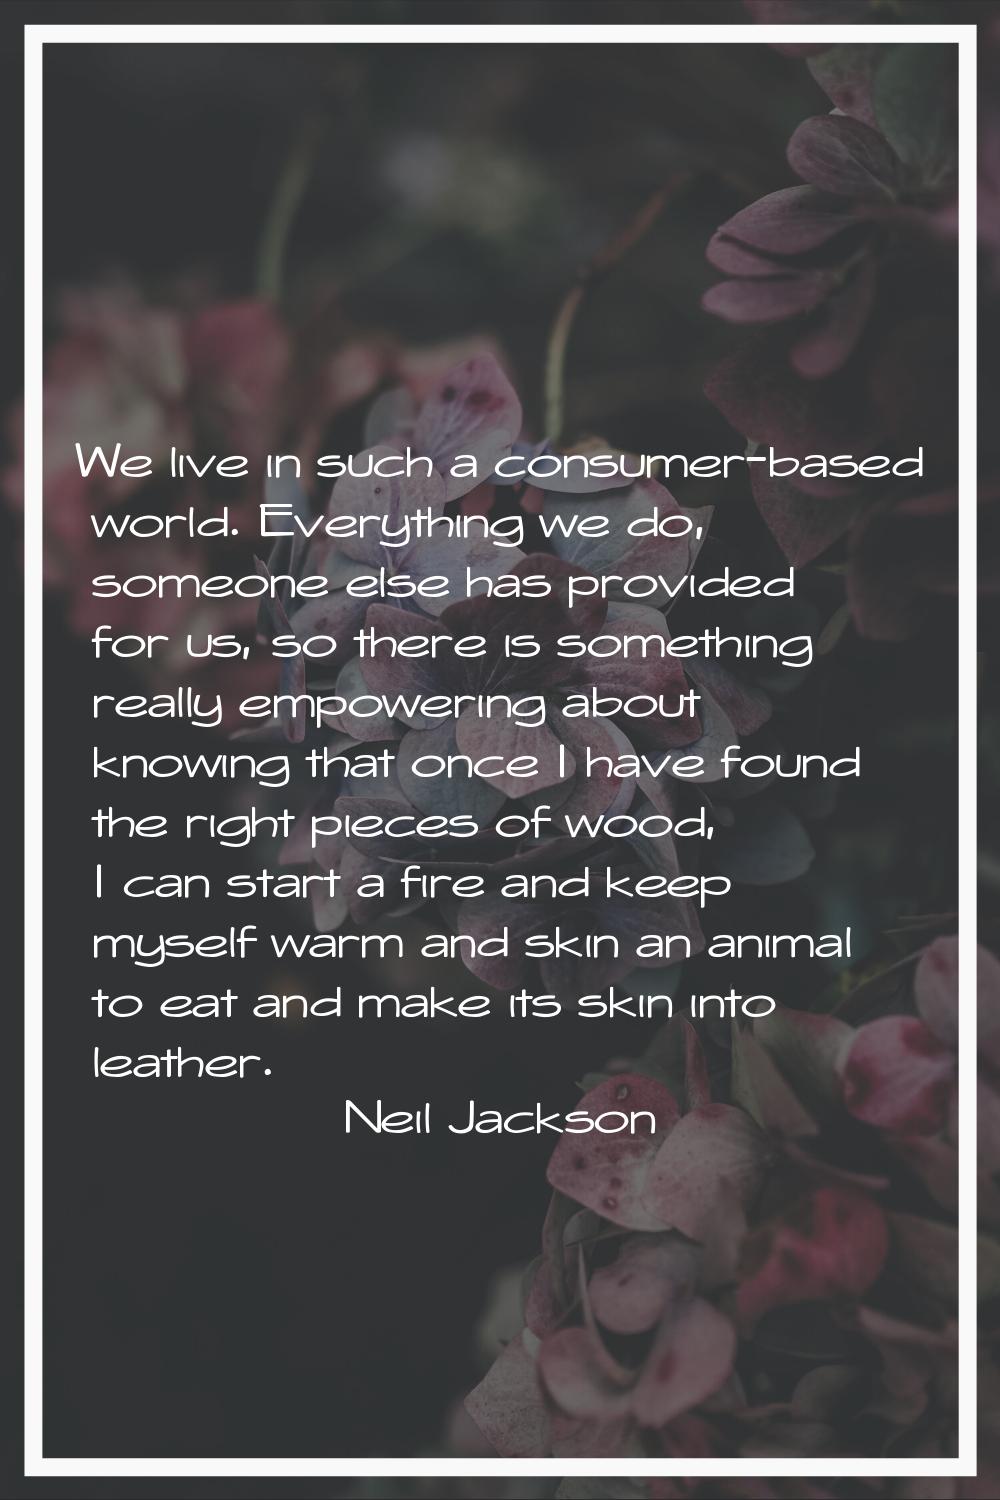 We live in such a consumer-based world. Everything we do, someone else has provided for us, so ther